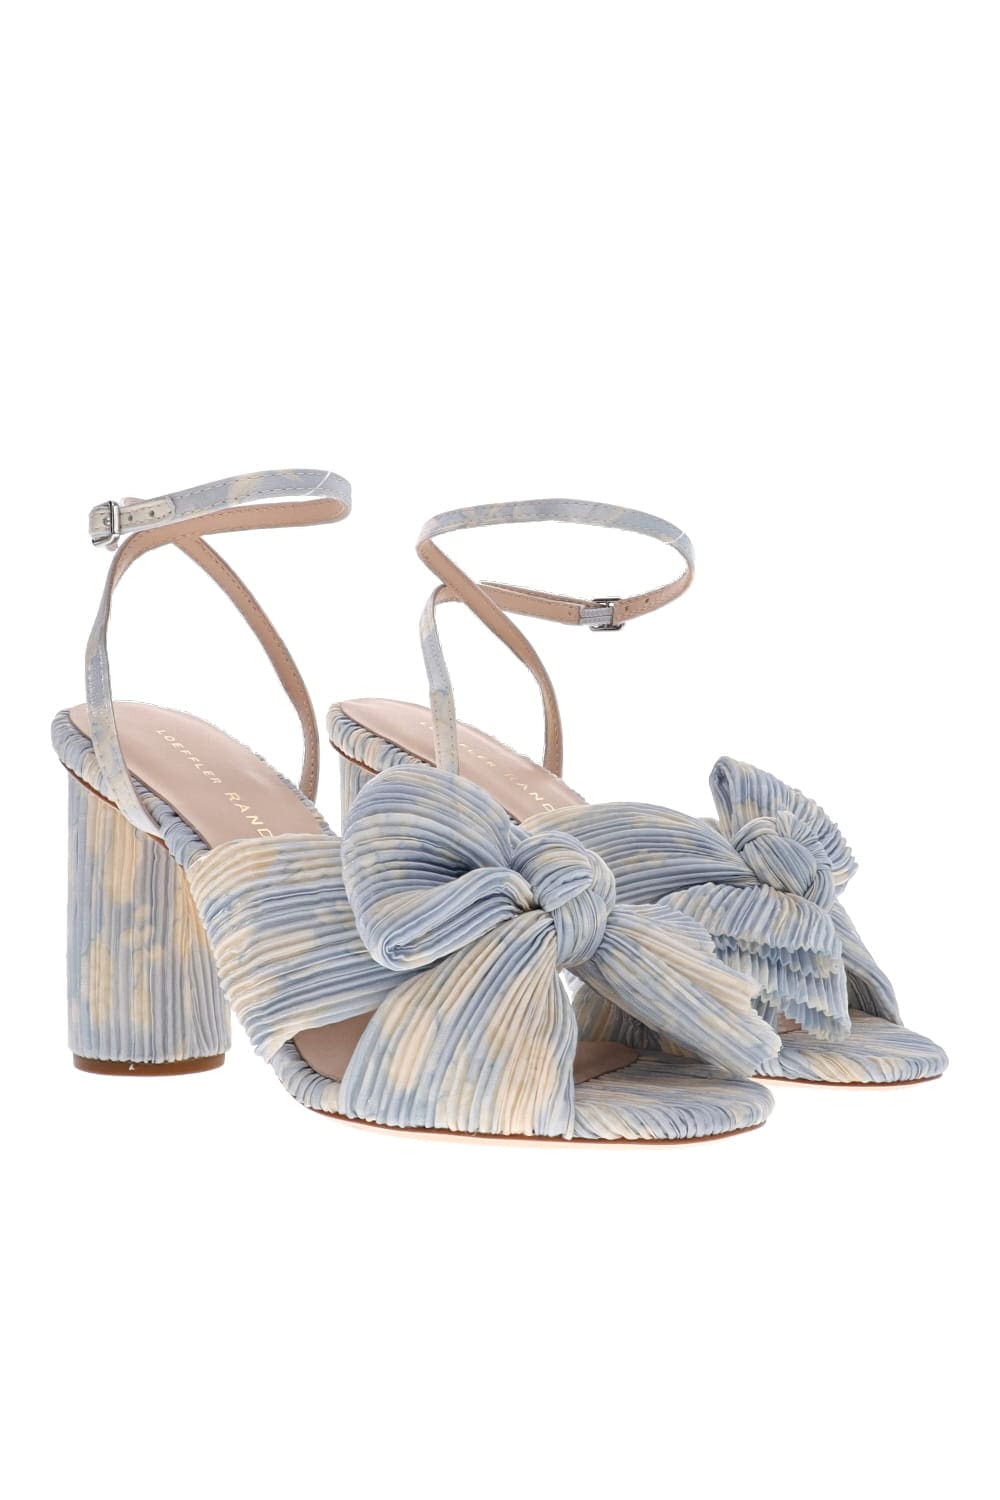 Loeffler Randall CAMELLIA PLEATED KNOT HEELED SANDAL WITH ANKLE STRAP CAMELLIA-PLFA-DUSBF Dusty Blue Floral